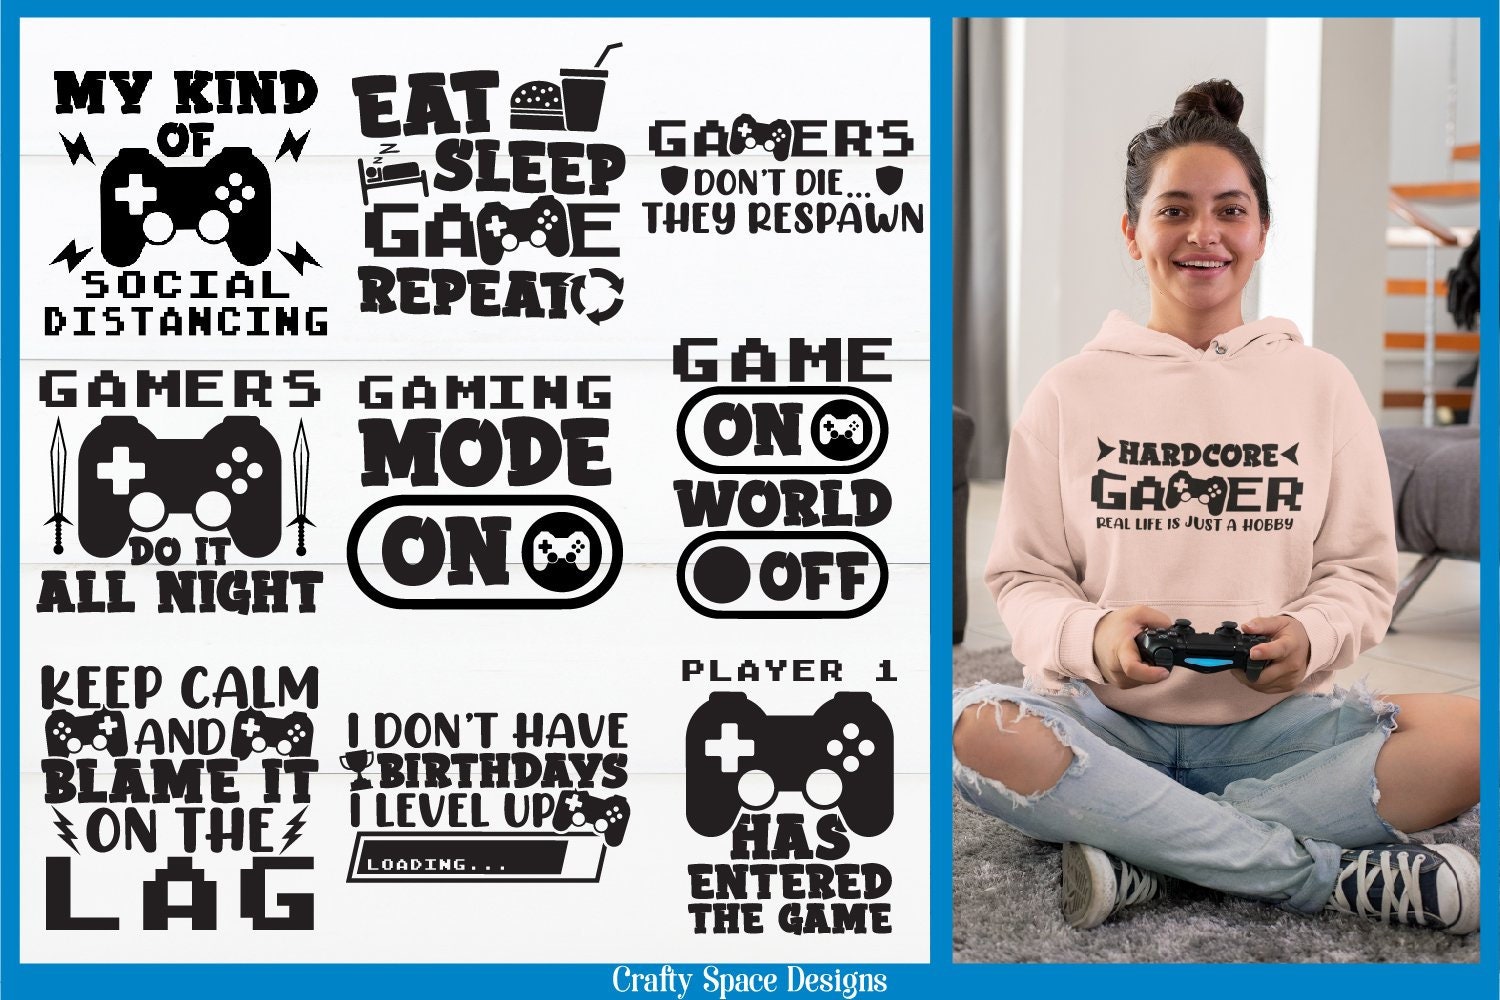 Gamer, Real Life is Just a Hobby SVG